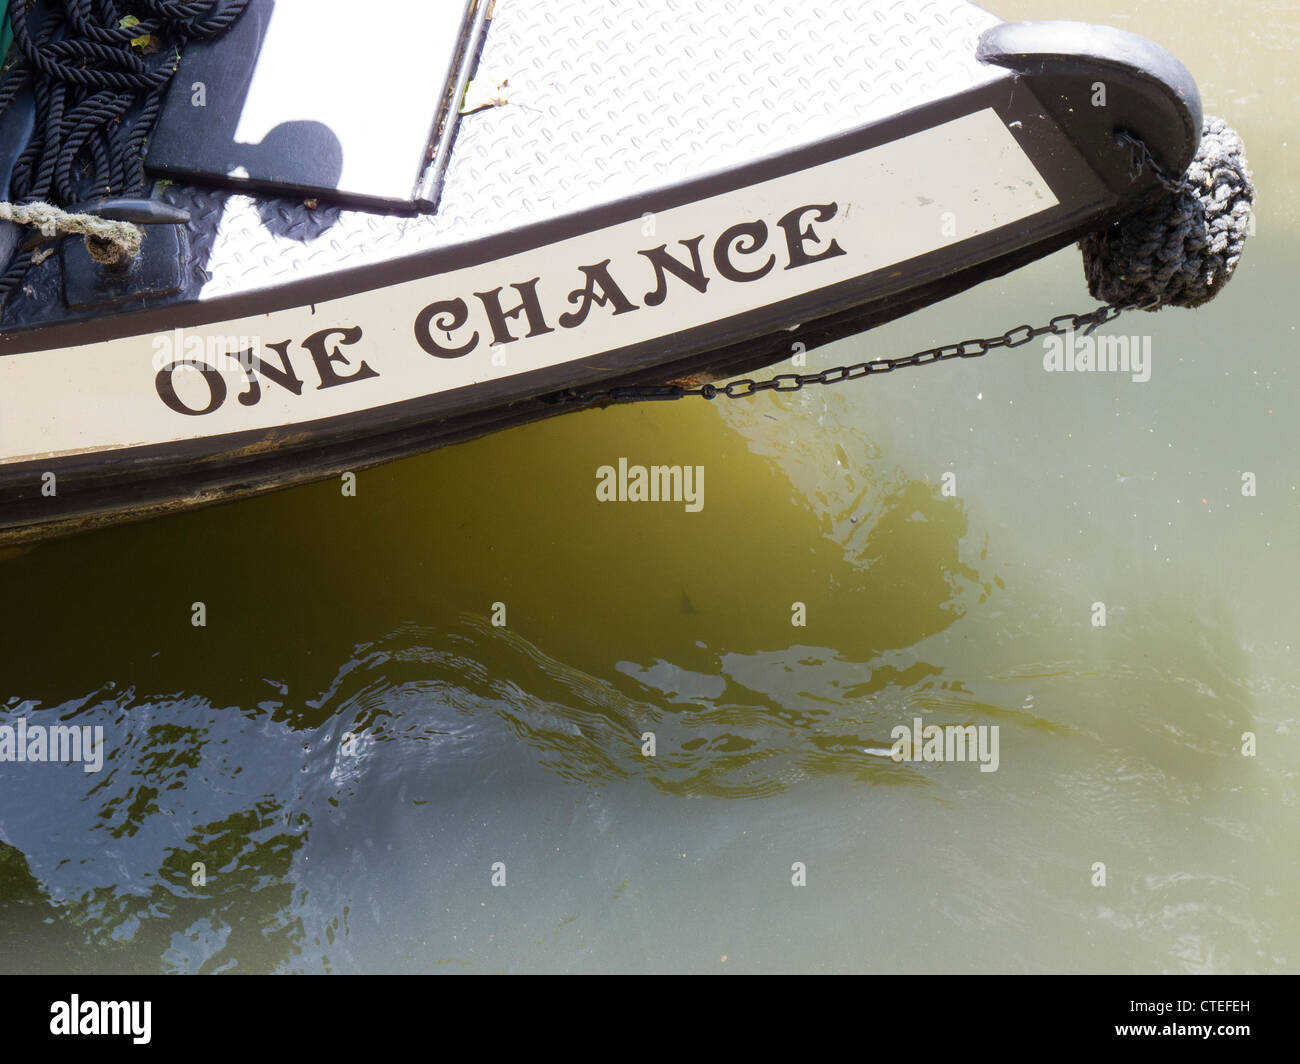 One chance boat named Stock Photo